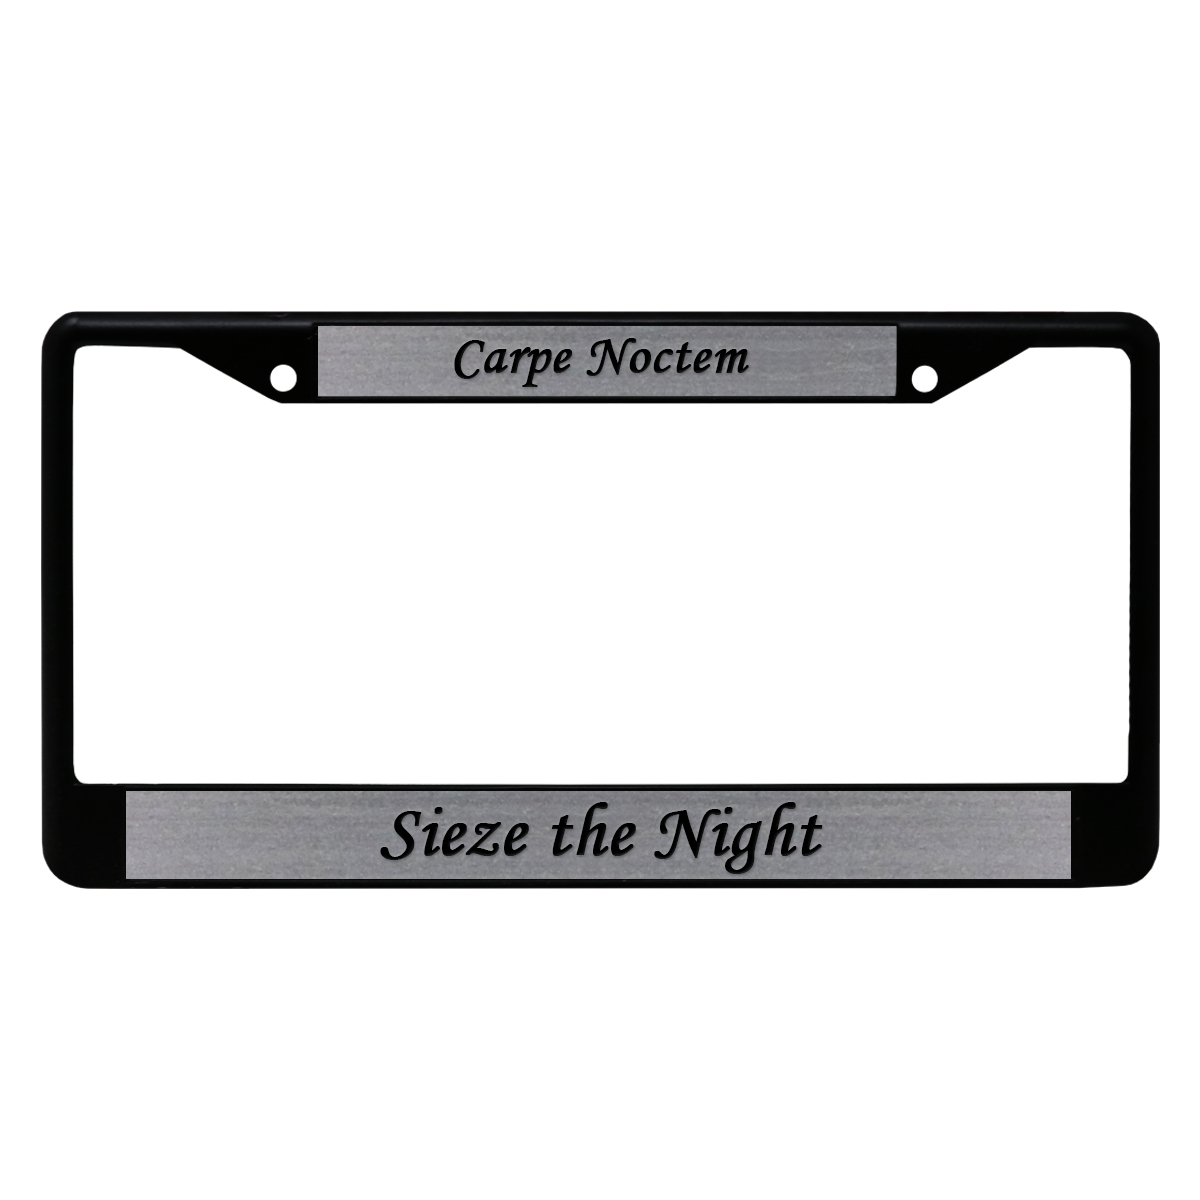 RETIRED NEW JERSEY STATE POLICE METAL LICENSE PLATE FRAME MADE IN USA 